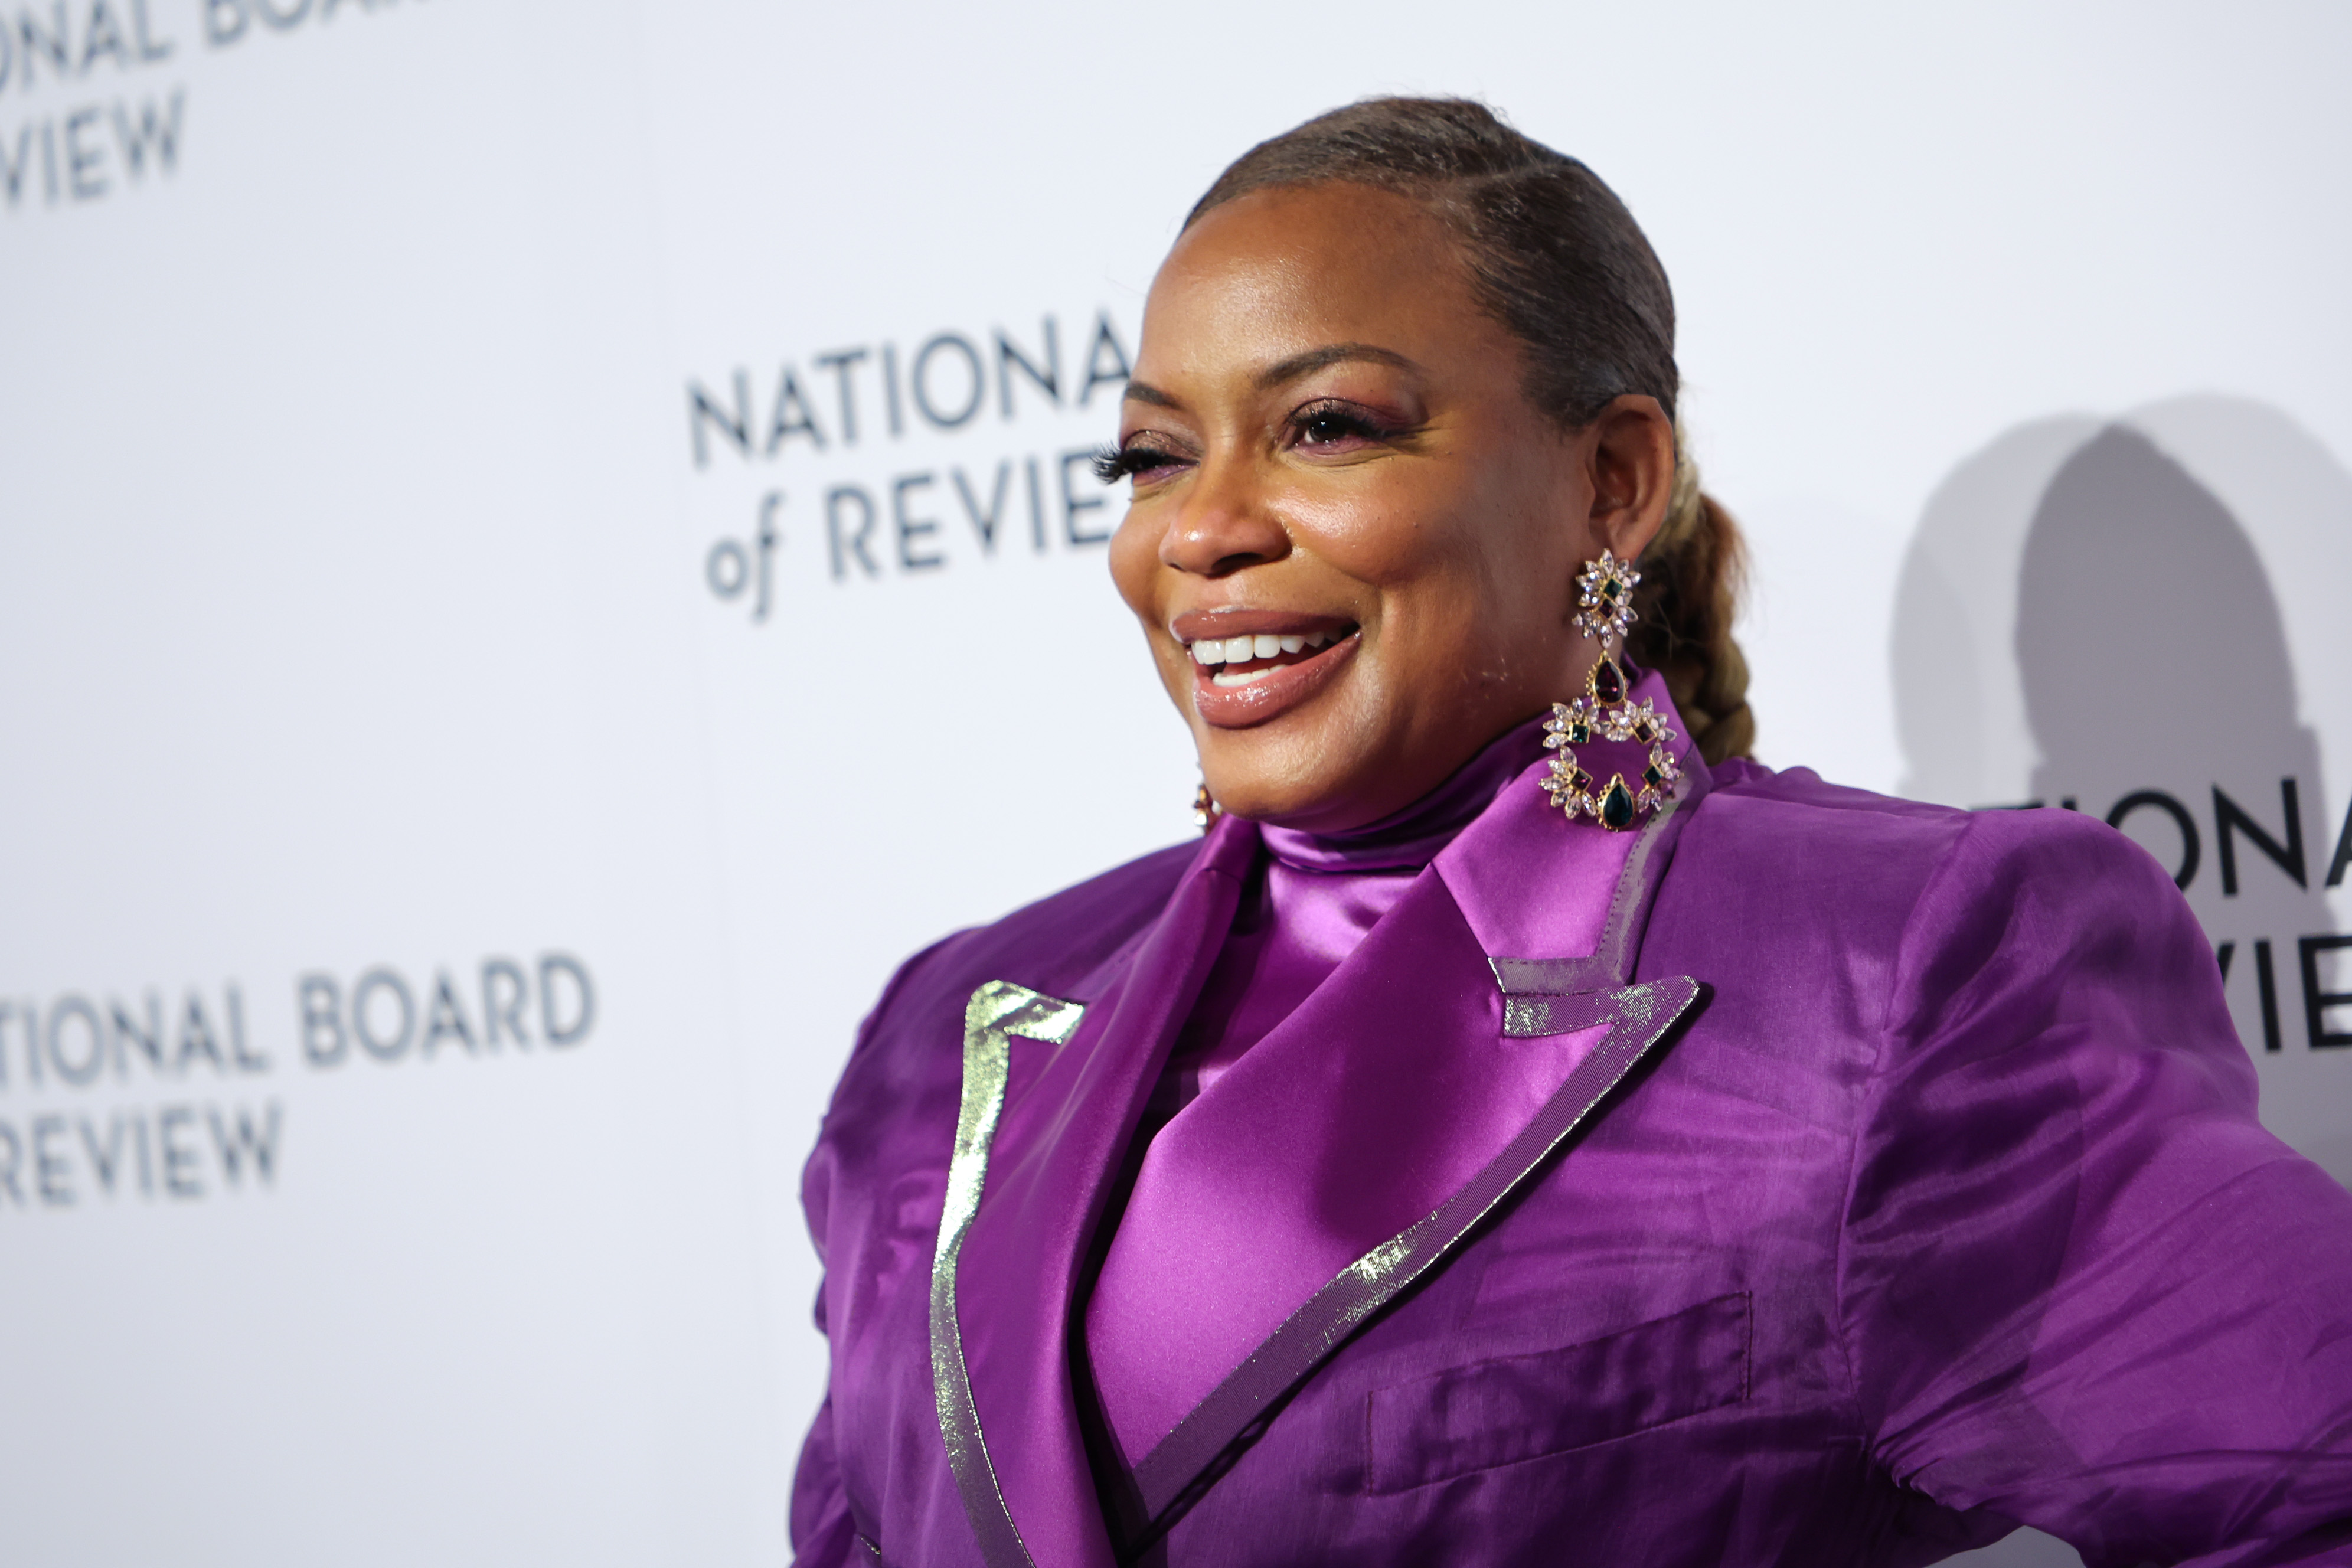 Aunjanue Ellis attends the National Board of Review annual awards gala at Cipriani 42nd Street on March 15, 2022 in New York City. | Source: Getty Images